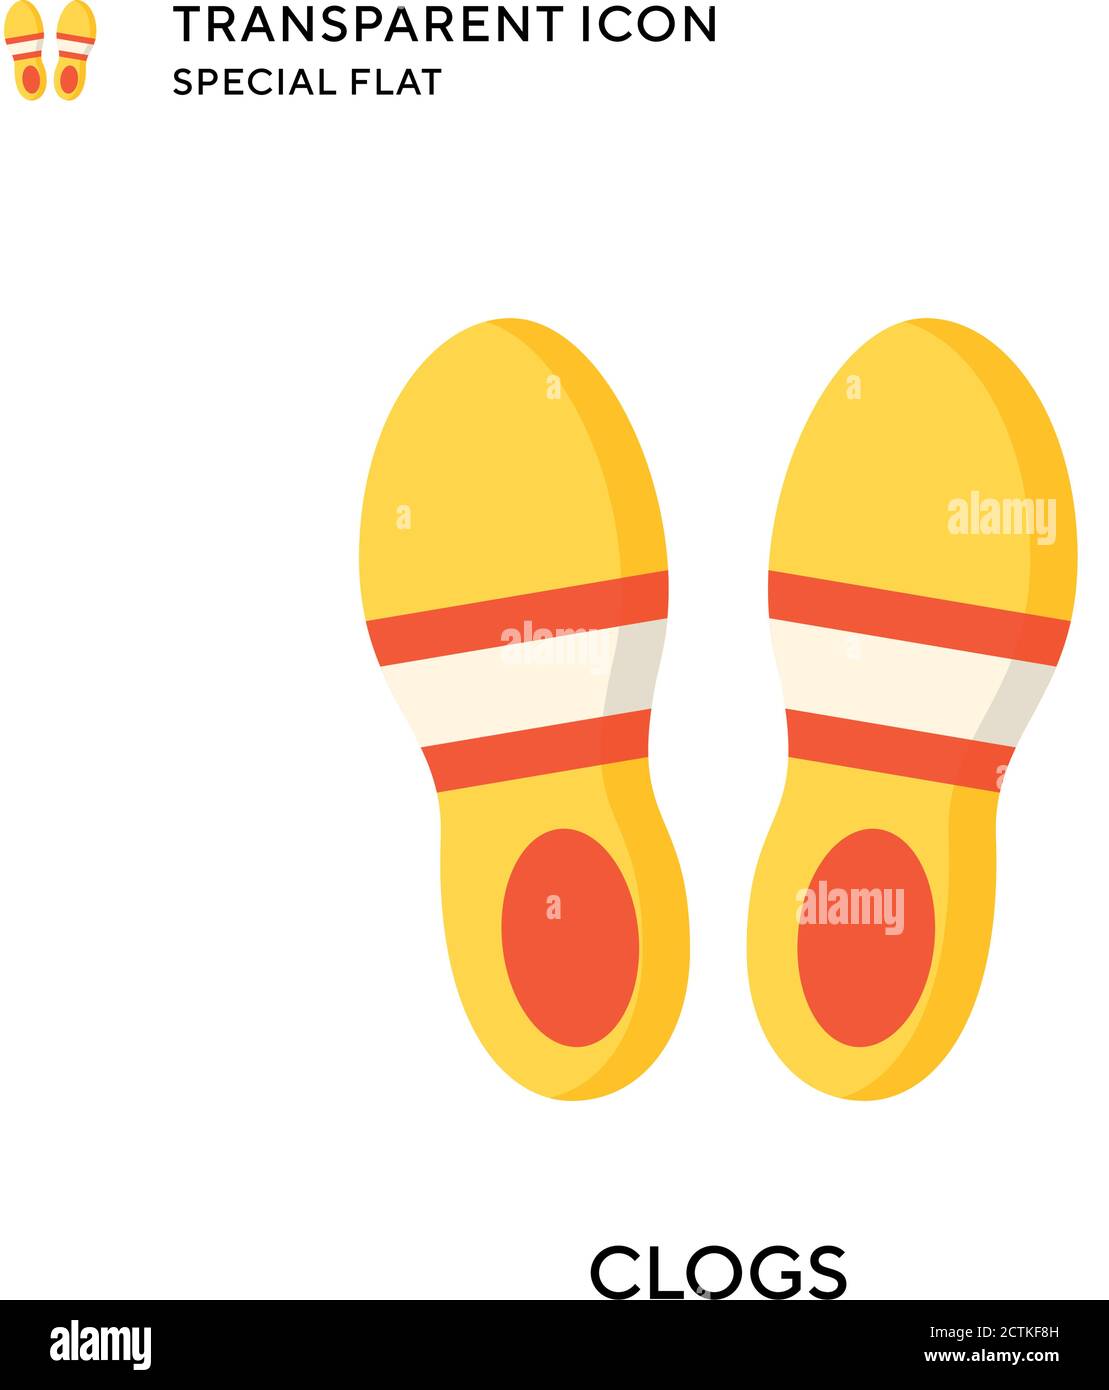 Clogs vector icon. Flat style illustration. EPS 10 vector. Stock Vector